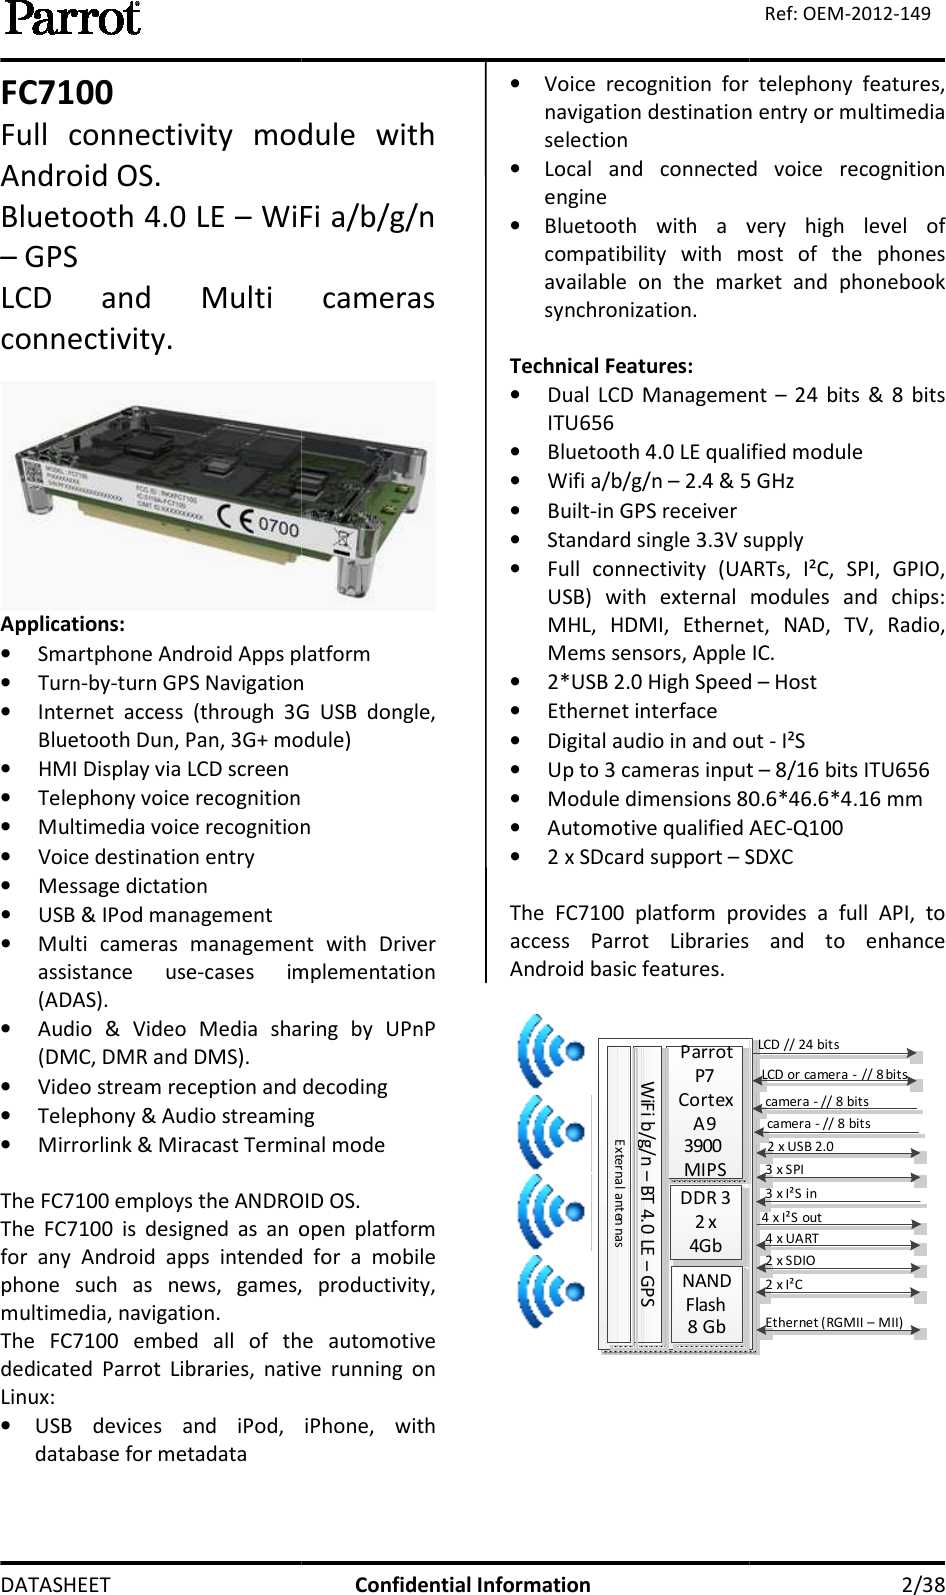  DATASHEET FC7100 Full  connectivity  module  with Android OS. Bluetooth 4.0 LE – WiFi – GPS  LCD  and  Multi  cameras connectivity.  Applications: • Smartphone Android Apps platform• Turn-by-turn GPS Navigation• Internet  access  (through  3G  USB  dongle, Bluetooth Dun, Pan, 3G+ module)• HMI Display via LCD screen • Telephony voice recognition• Multimedia voice recognition• Voice destination entry • Message dictation • USB &amp; IPod management • Multi  cameras  management  with  Driver assistance  use-cases  implementation (ADAS). • Audio  &amp;  Video  Media  sharing  by  UPnP (DMC, DMR and DMS). • Video stream reception and decoding• Telephony &amp; Audio streaming• Mirrorlink &amp; Miracast Terminal mode The FC7100 employs the ANDROID OSThe  FC7100  is  designed  as  an  open  platform for  any  Android  apps  intended  for  a  mobile phone  such  as  news,  games,  productivity, multimedia, navigation.  The  FC7100  embed  all  of  the  autodedicated  Parrot  Libraries,  native  running  on Linux: • USB  devices  and  iPod,  iPhone,  with database for metadata Confidential Information Full  connectivity  module  with WiFi a/b/g/n LCD  and  Multi  cameras  Smartphone Android Apps platform turn GPS Navigation Internet  access  (through  3G  USB  dongle, Bluetooth Dun, Pan, 3G+ module)   Multimedia voice recognition Multi  cameras  management  with  Driver cases  implementation Audio  &amp;  Video  Media  sharing  by  UPnP Video stream reception and decoding Telephony &amp; Audio streaming Mirrorlink &amp; Miracast Terminal mode The FC7100 employs the ANDROID OS. The  FC7100  is  designed  as  an  open  platform for  any  Android  apps  intended  for  a  mobile phone  such  as  news,  games,  productivity, The  FC7100  embed  all  of  the  automotive dedicated  Parrot  Libraries,  native  running  on USB  devices  and  iPod,  iPhone,  with • Voice  recognition  for  telephony  features, navigation destination entry or multimedia selection • Local  and  connected  voice  recognition engine • Bluetooth  with  a  very  high  level  of compatibility  with  most  of  the  phones available  on  the  market  and  phonebook synchronization.  Technical Features: • Dual  LCD  Management ITU656  • Bluetooth 4.0 LE qualified module• Wifi a/b/g/n – 2.4 &amp; 5 • Built-in GPS receiver • Standard single 3.3V supply• Full  connectivity  (UARTs,  I²C,  SPI,  GPIO, USB)  with  external  modules  and  chips: MHL,  HDMI,  Ethernet,  NAD,  TV,  Radio, Mems sensors, Apple IC.  • 2*USB 2.0 High Speed • Ethernet interface  • Digital audio in and out • Up to 3 cameras input • Module dimensions 80.6*46.6*4.1• Automotive qualified AEC• 2 x SDcard support – SDXC The  FC7100  platform  provides  a  full  API,  to access  Parrot  Libraries  and Android basic features.  Parrot P7Cortex A93900 MIPSDDR 32 x 4GbNAND Flash8 GbWiFi b/g/n – BT 4.0 LE – GPSExternal anten nas    2/38 Ref: OEM-2012-149 Voice  recognition  for  telephony  features, navigation destination entry or multimedia Local  and  connected  voice  recognition Bluetooth  with  a  very  high  level  of compatibility  with  most  of  the  phones available  on  the  market  and  phonebook Dual  LCD  Management – 24  bits  &amp;  8  bits Bluetooth 4.0 LE qualified module 2.4 &amp; 5 GHz  Standard single 3.3V supply Full  connectivity  (UARTs,  I²C,  SPI,  GPIO, USB)  with  external  modules  and  chips: MHL,  HDMI,  Ethernet,  NAD,  TV,  Radio, Mems sensors, Apple IC.   2*USB 2.0 High Speed – Host  dio in and out - I²S Up to 3 cameras input – 8/16 bits ITU656 80.6*46.6*4.16 mm  Automotive qualified AEC-Q100 SDXC 100  platform  provides  a  full  API,  to access  Parrot  Libraries  and to  enhance LCD // 24 bitsLCD or camera - // 8 bits2 x USB 2.03 x SPI3 x I²S in4 x I²S out4 x UART2 x SDIO2 x I²CEthernet (RGMII – MII)camera - // 8 bitscamera - // 8 bits  